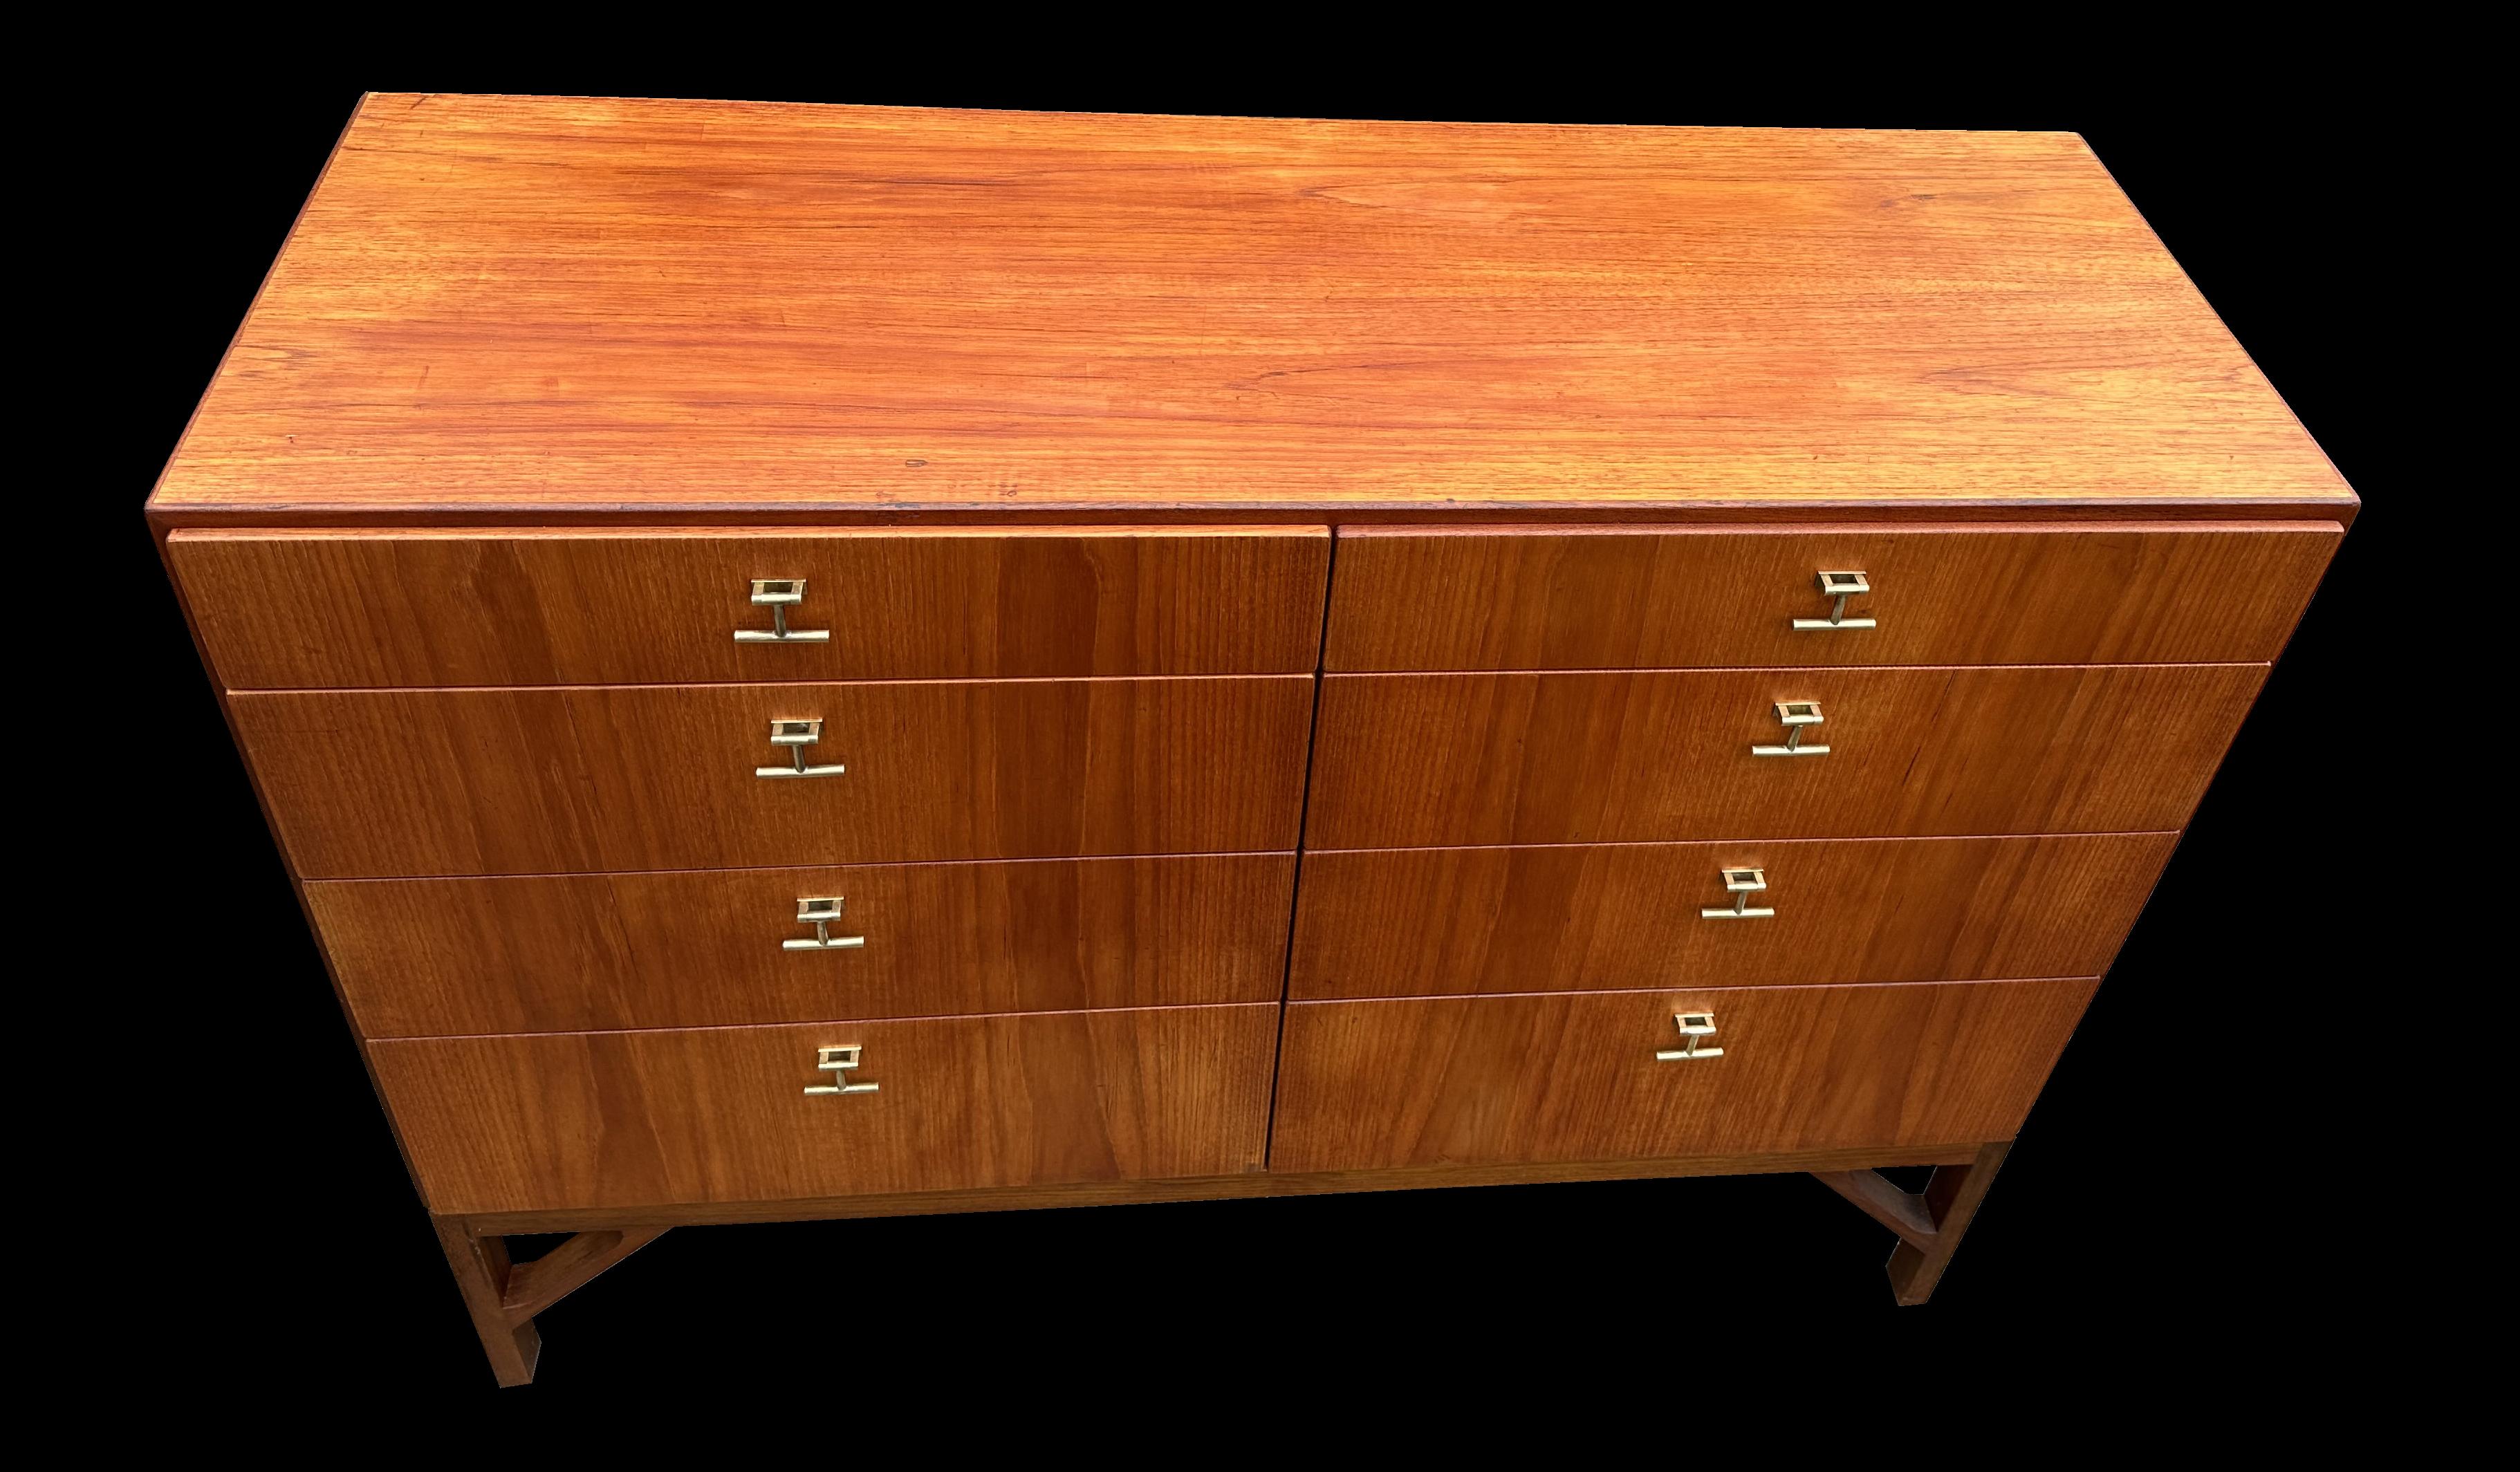 8 Drawer Teak Chest by Borge Mogensen for FDB In Good Condition For Sale In Little Burstead, Essex